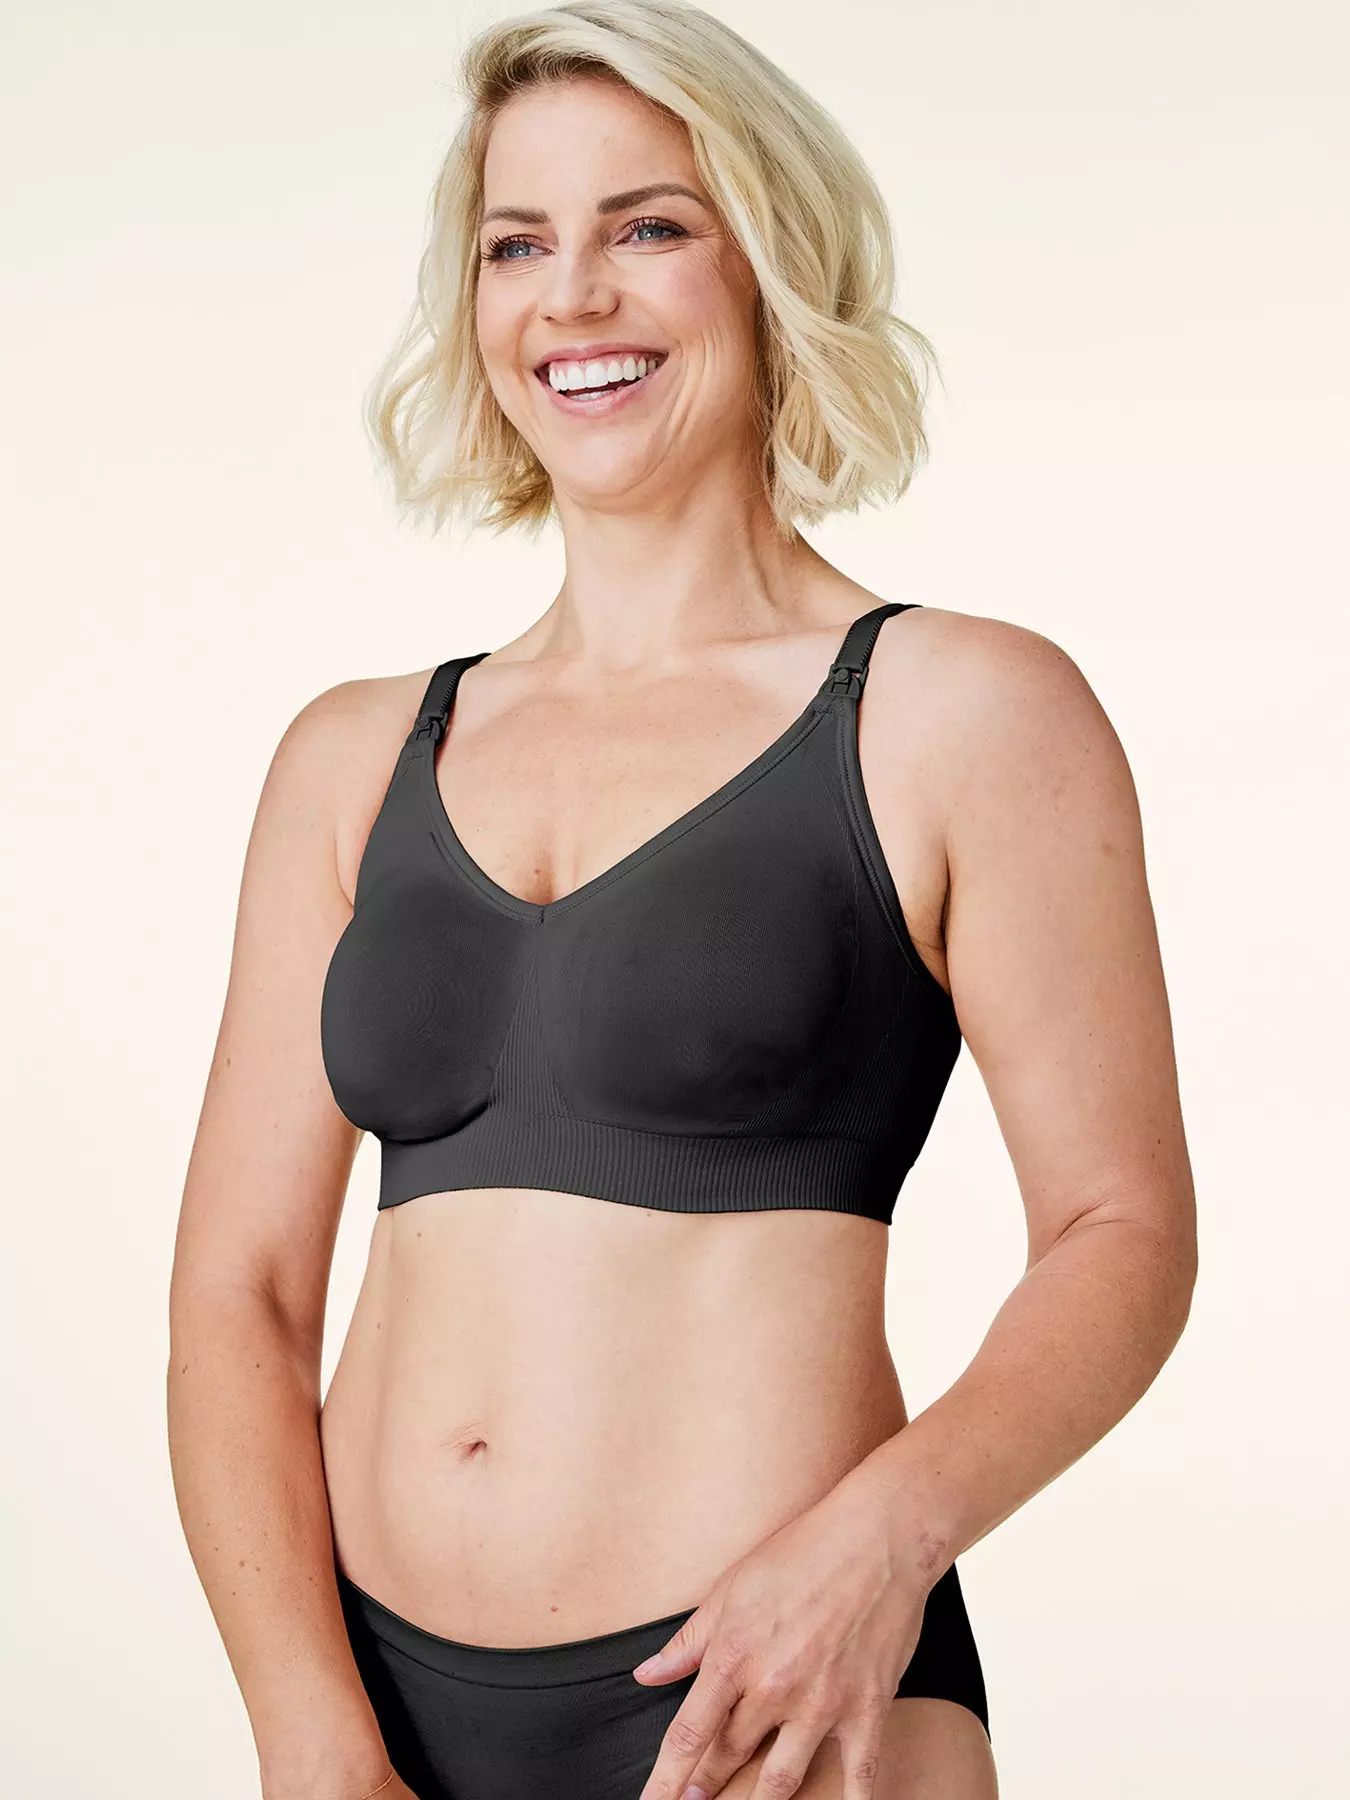 74-Year-Old Shoppers Say This $7 Bra “Feels Like a Second Skin”